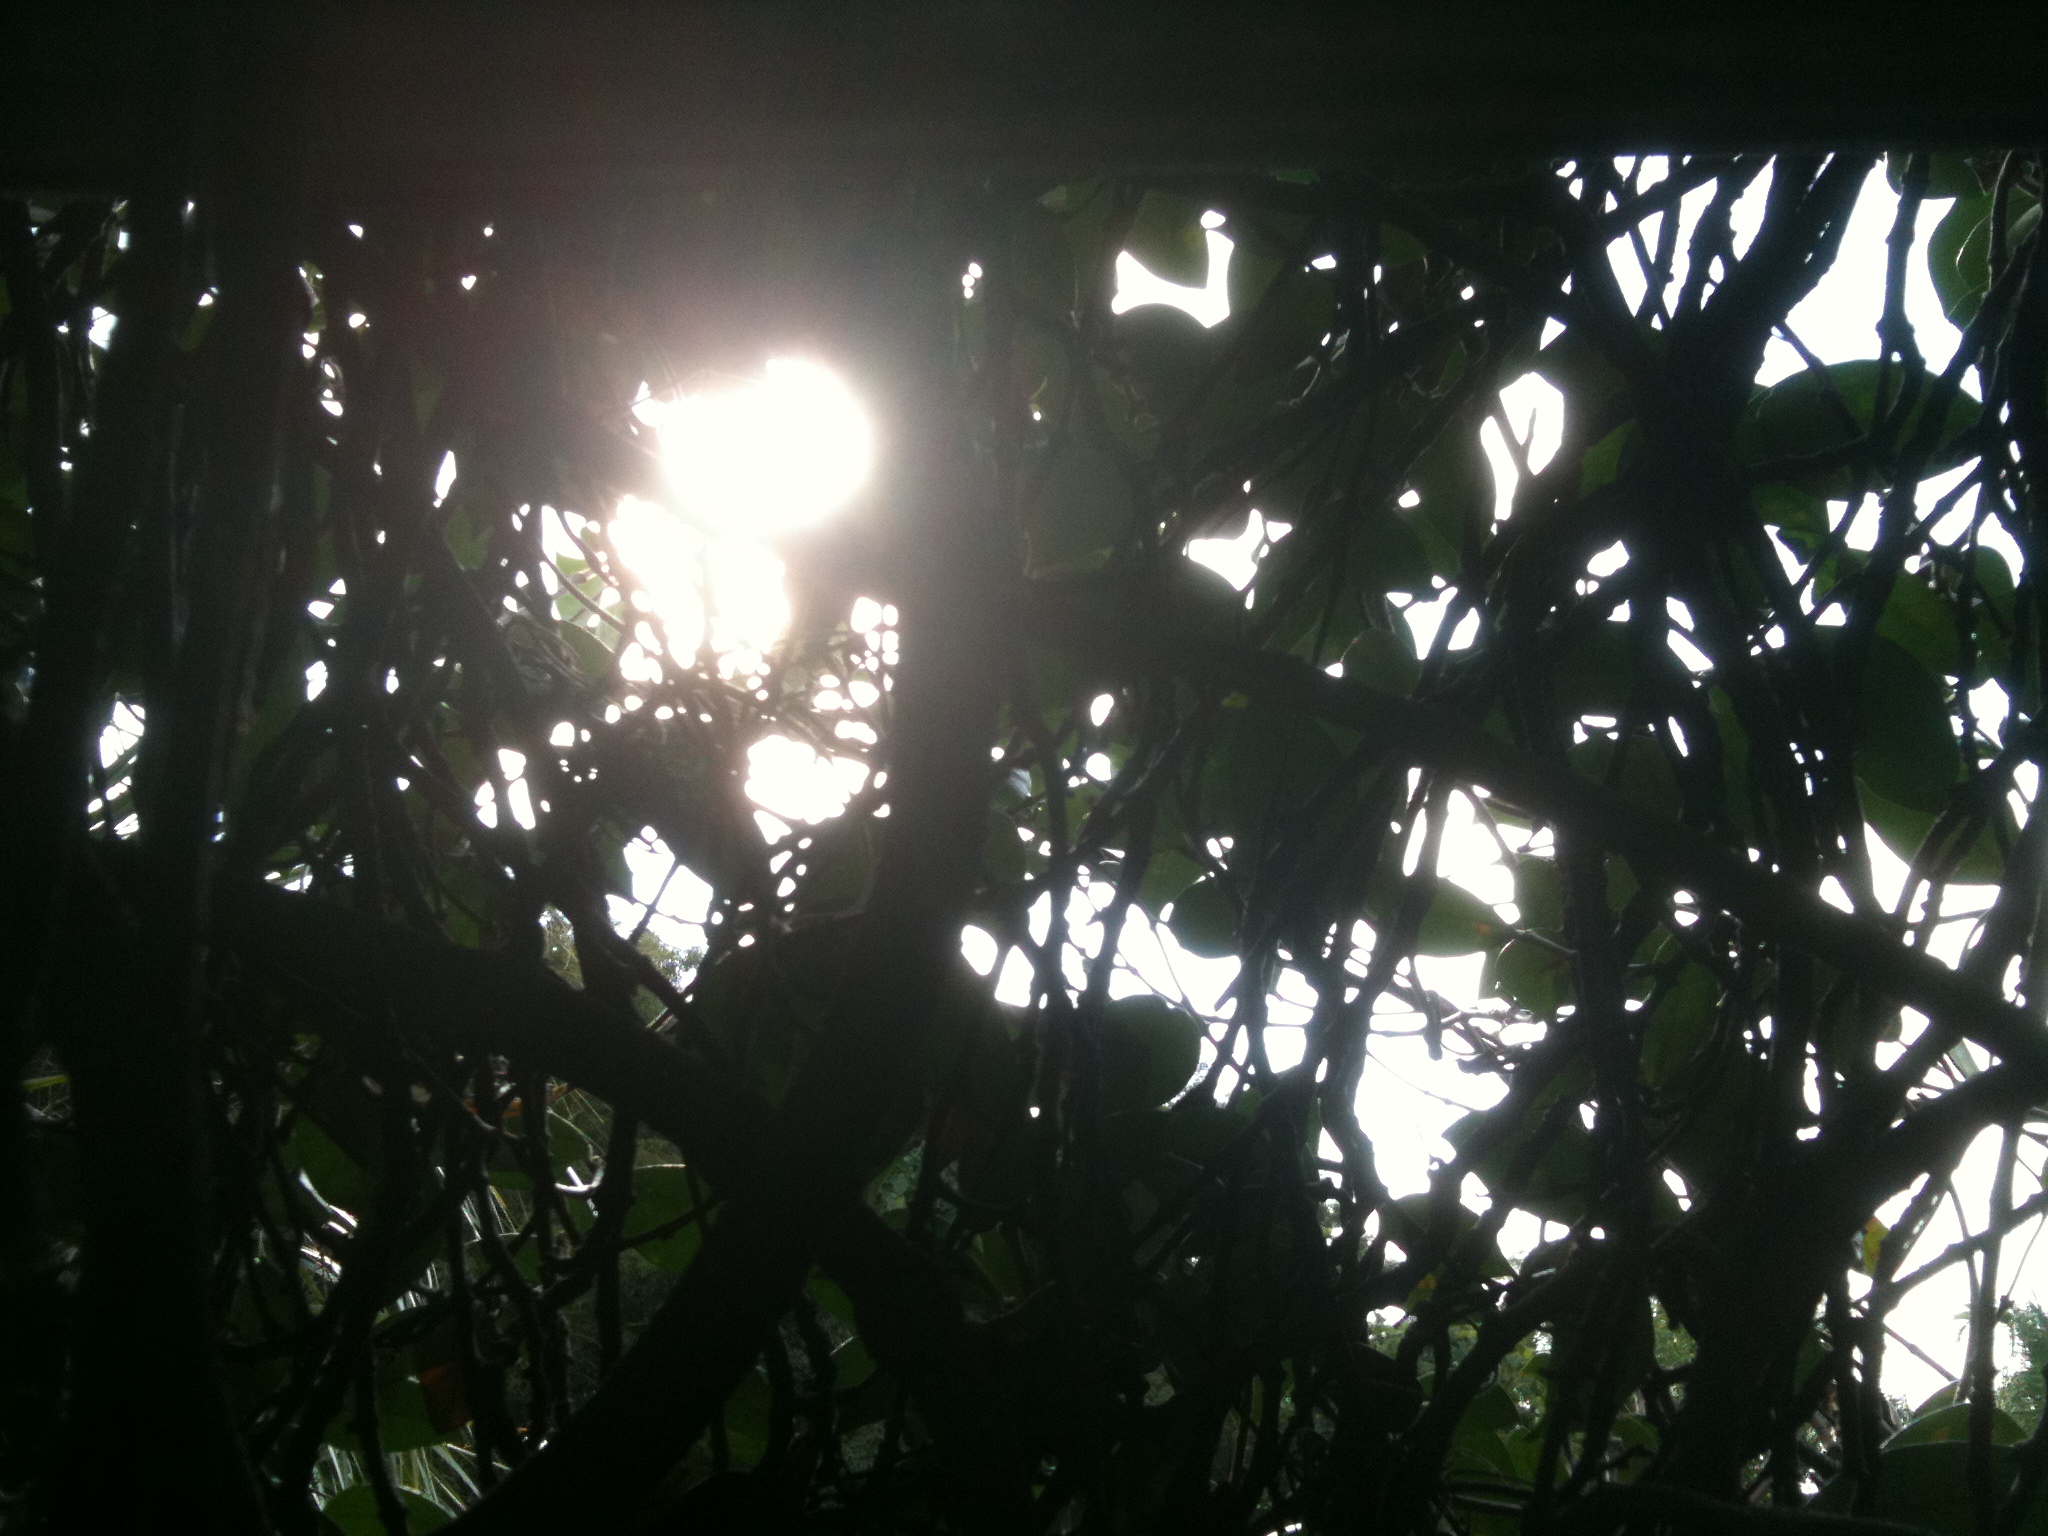 sunlight through some leaves with dark shadows